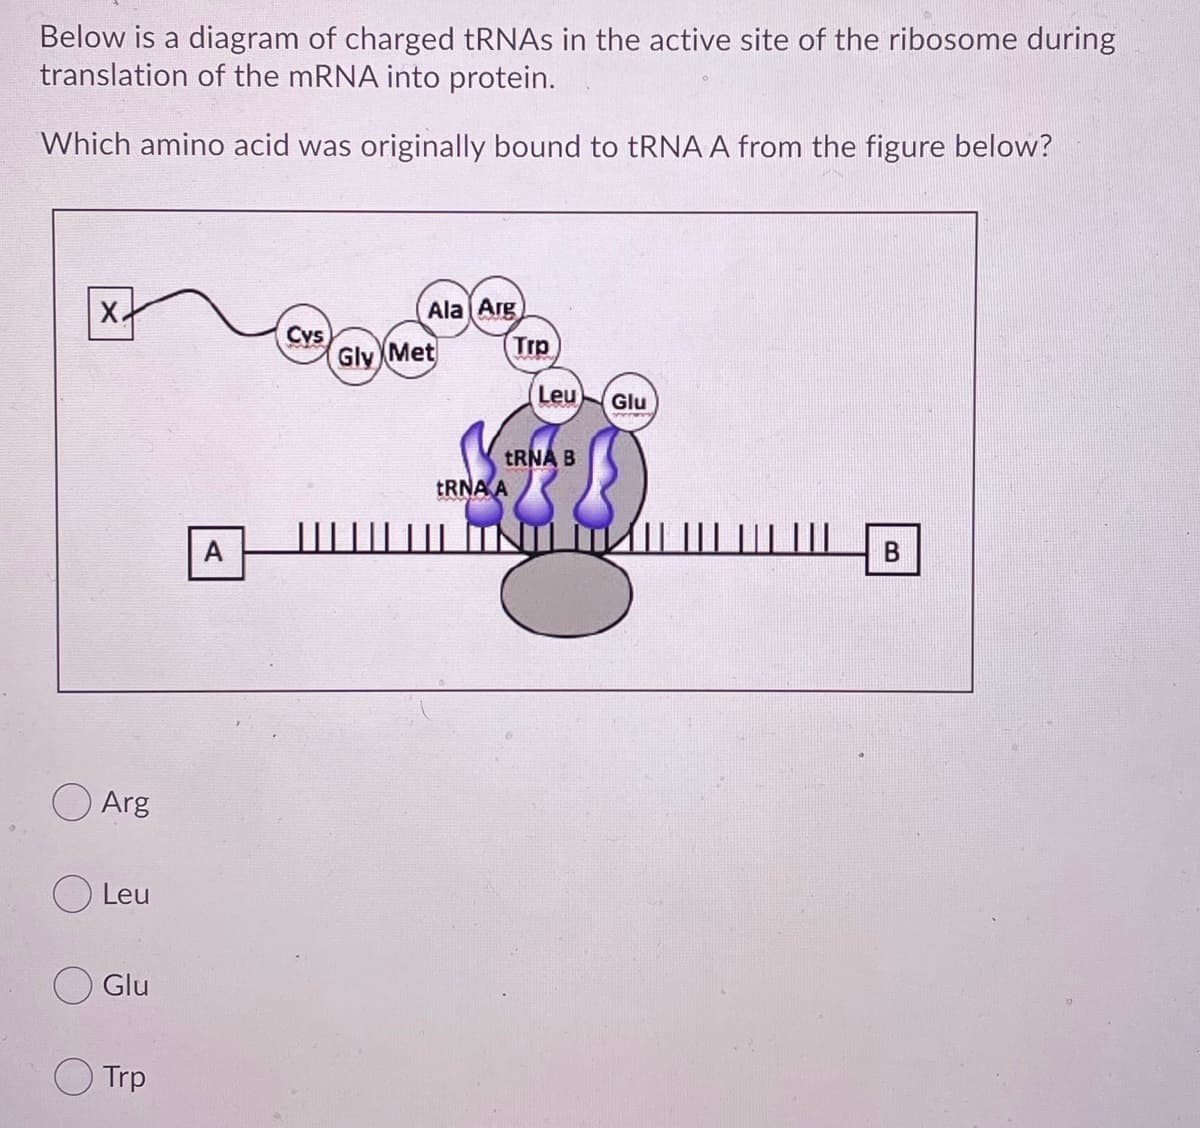 Below is a diagram of charged TRNAS in the active site of the ribosome during
translation of the mRNA into protein.
Which amino acid was originally bound to tRNA A from the figure below?
X.
Ala Arg
Cys
Gly Met
Trp
Leu
Glu
TRNA B
TRNA A
A
TIND
O Arg
O Leu
Glu
O Trp
